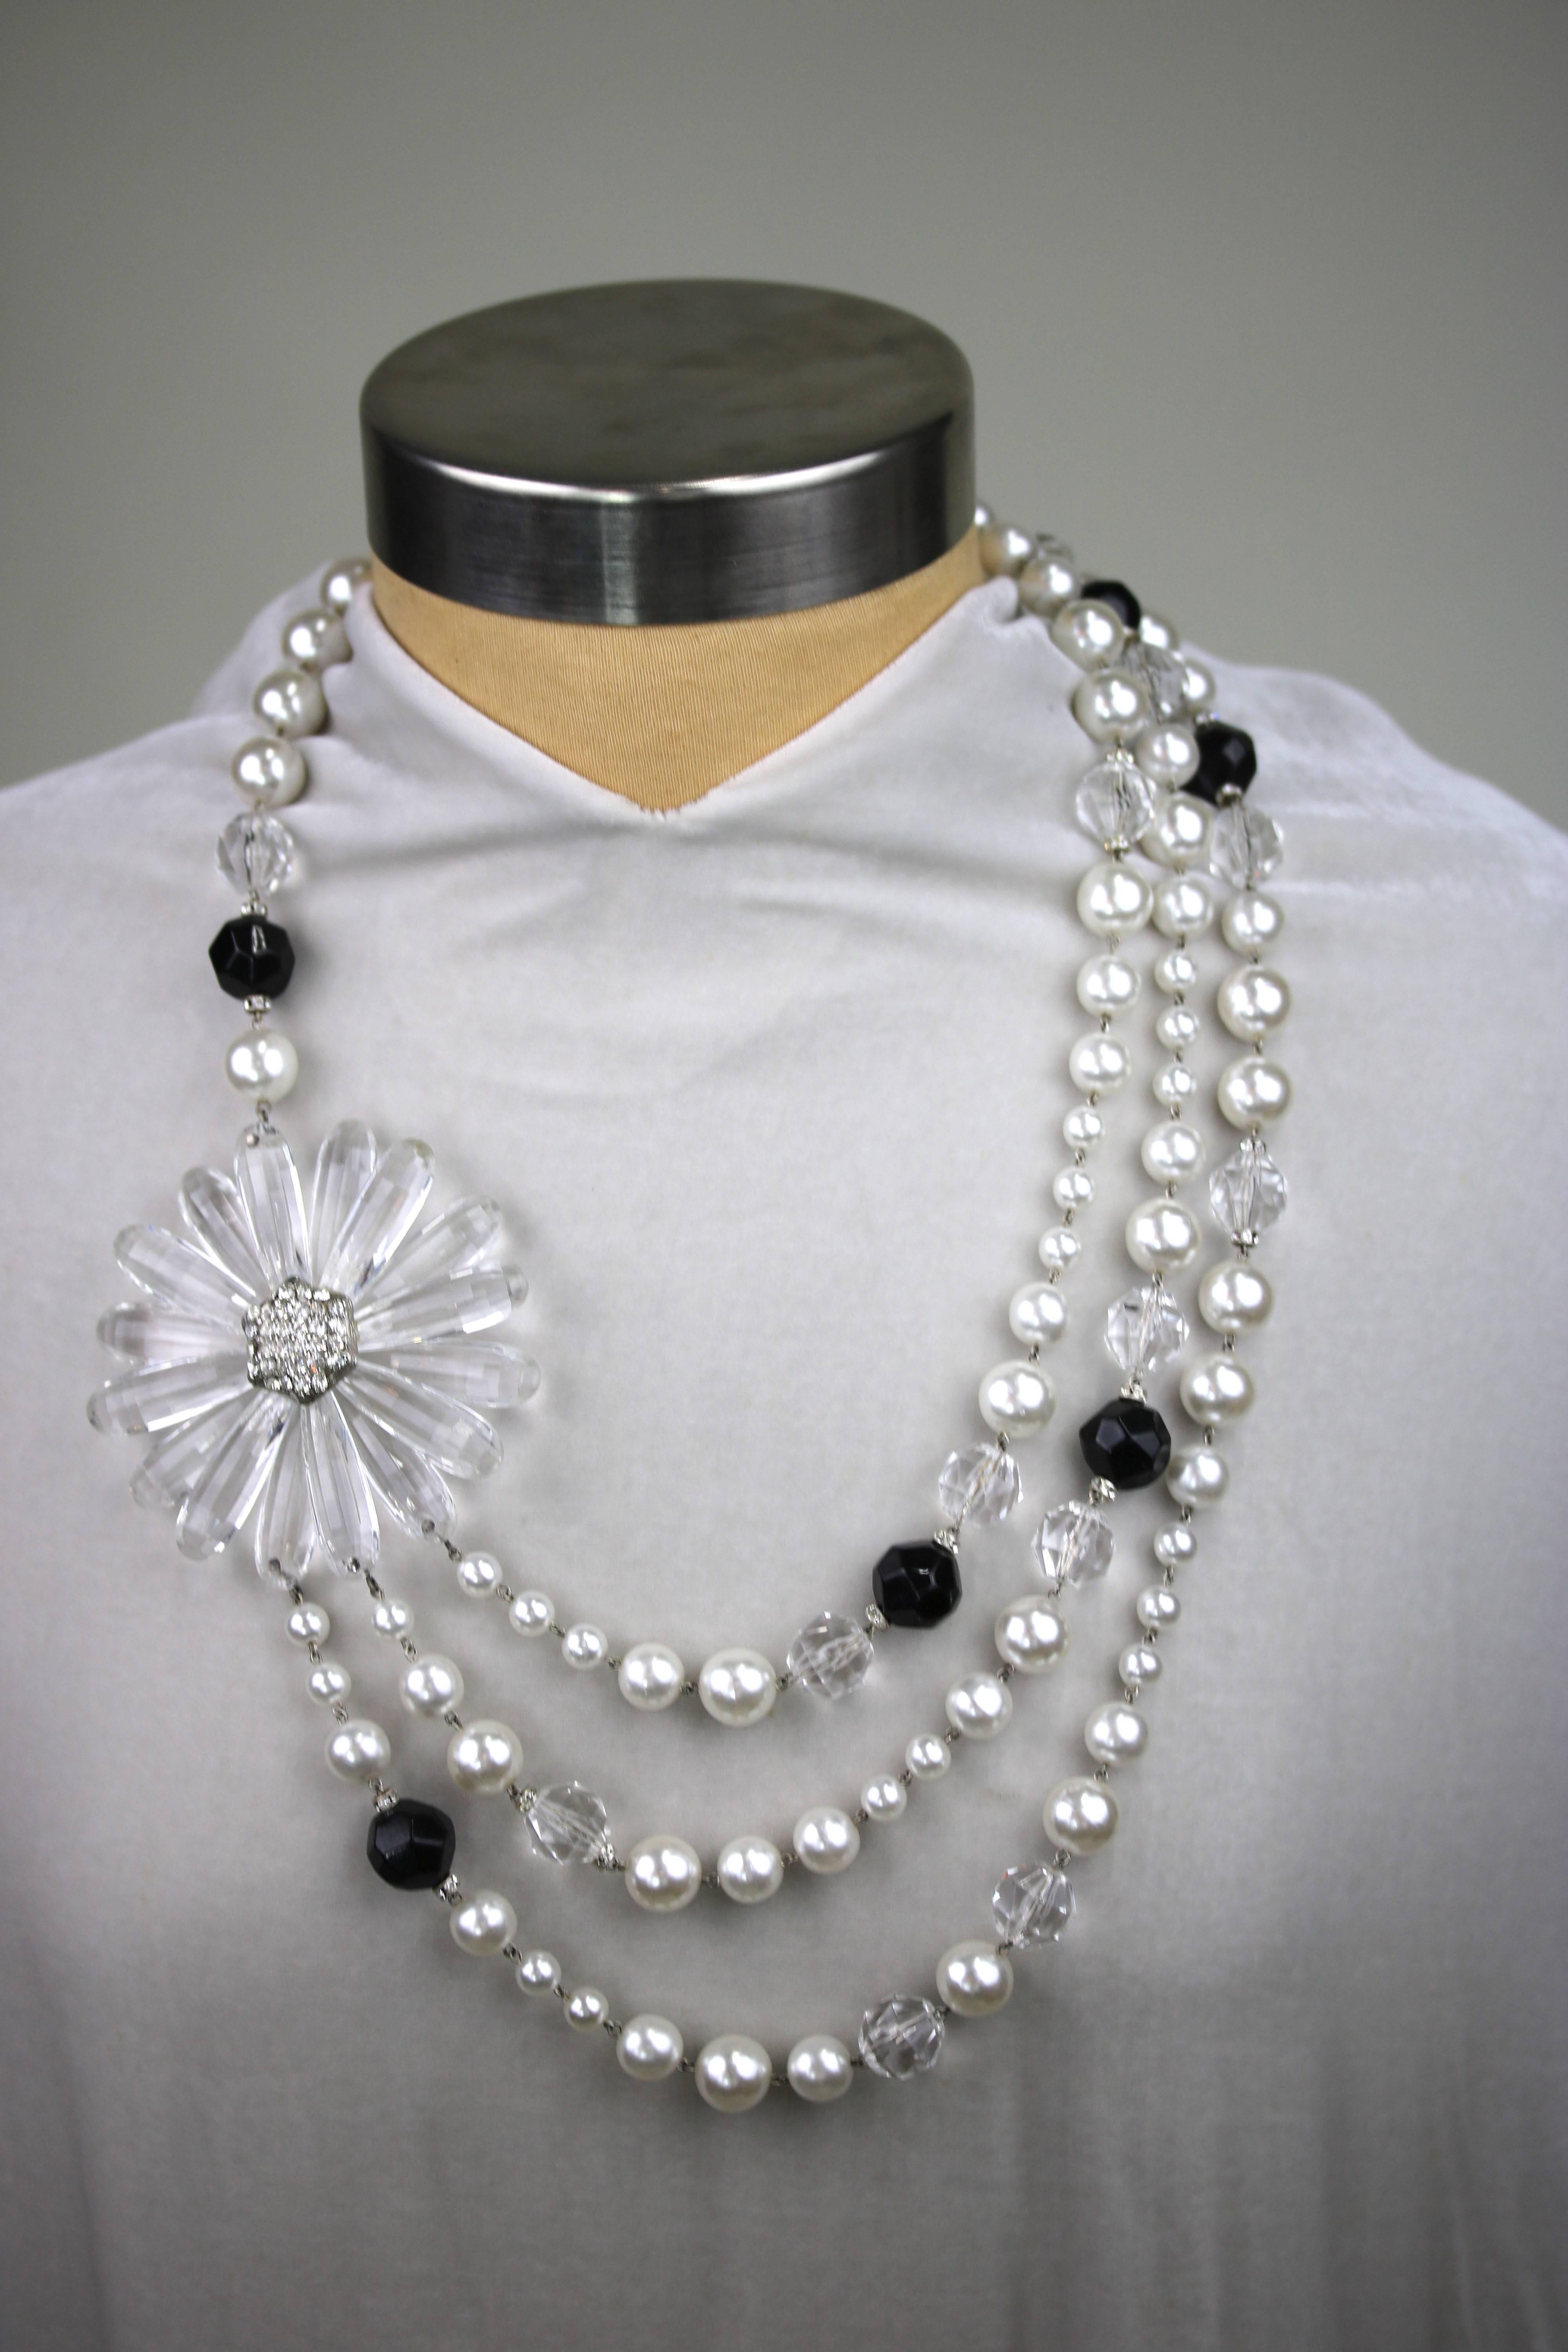 A lovely bold collar, multi strands of faux pearl, resin crystal, onyx and a large Lucite flower with czs in silver metal- Signature magnetic clasp-never worn with original Angela Caputi tag.Her production and designs are precise and very